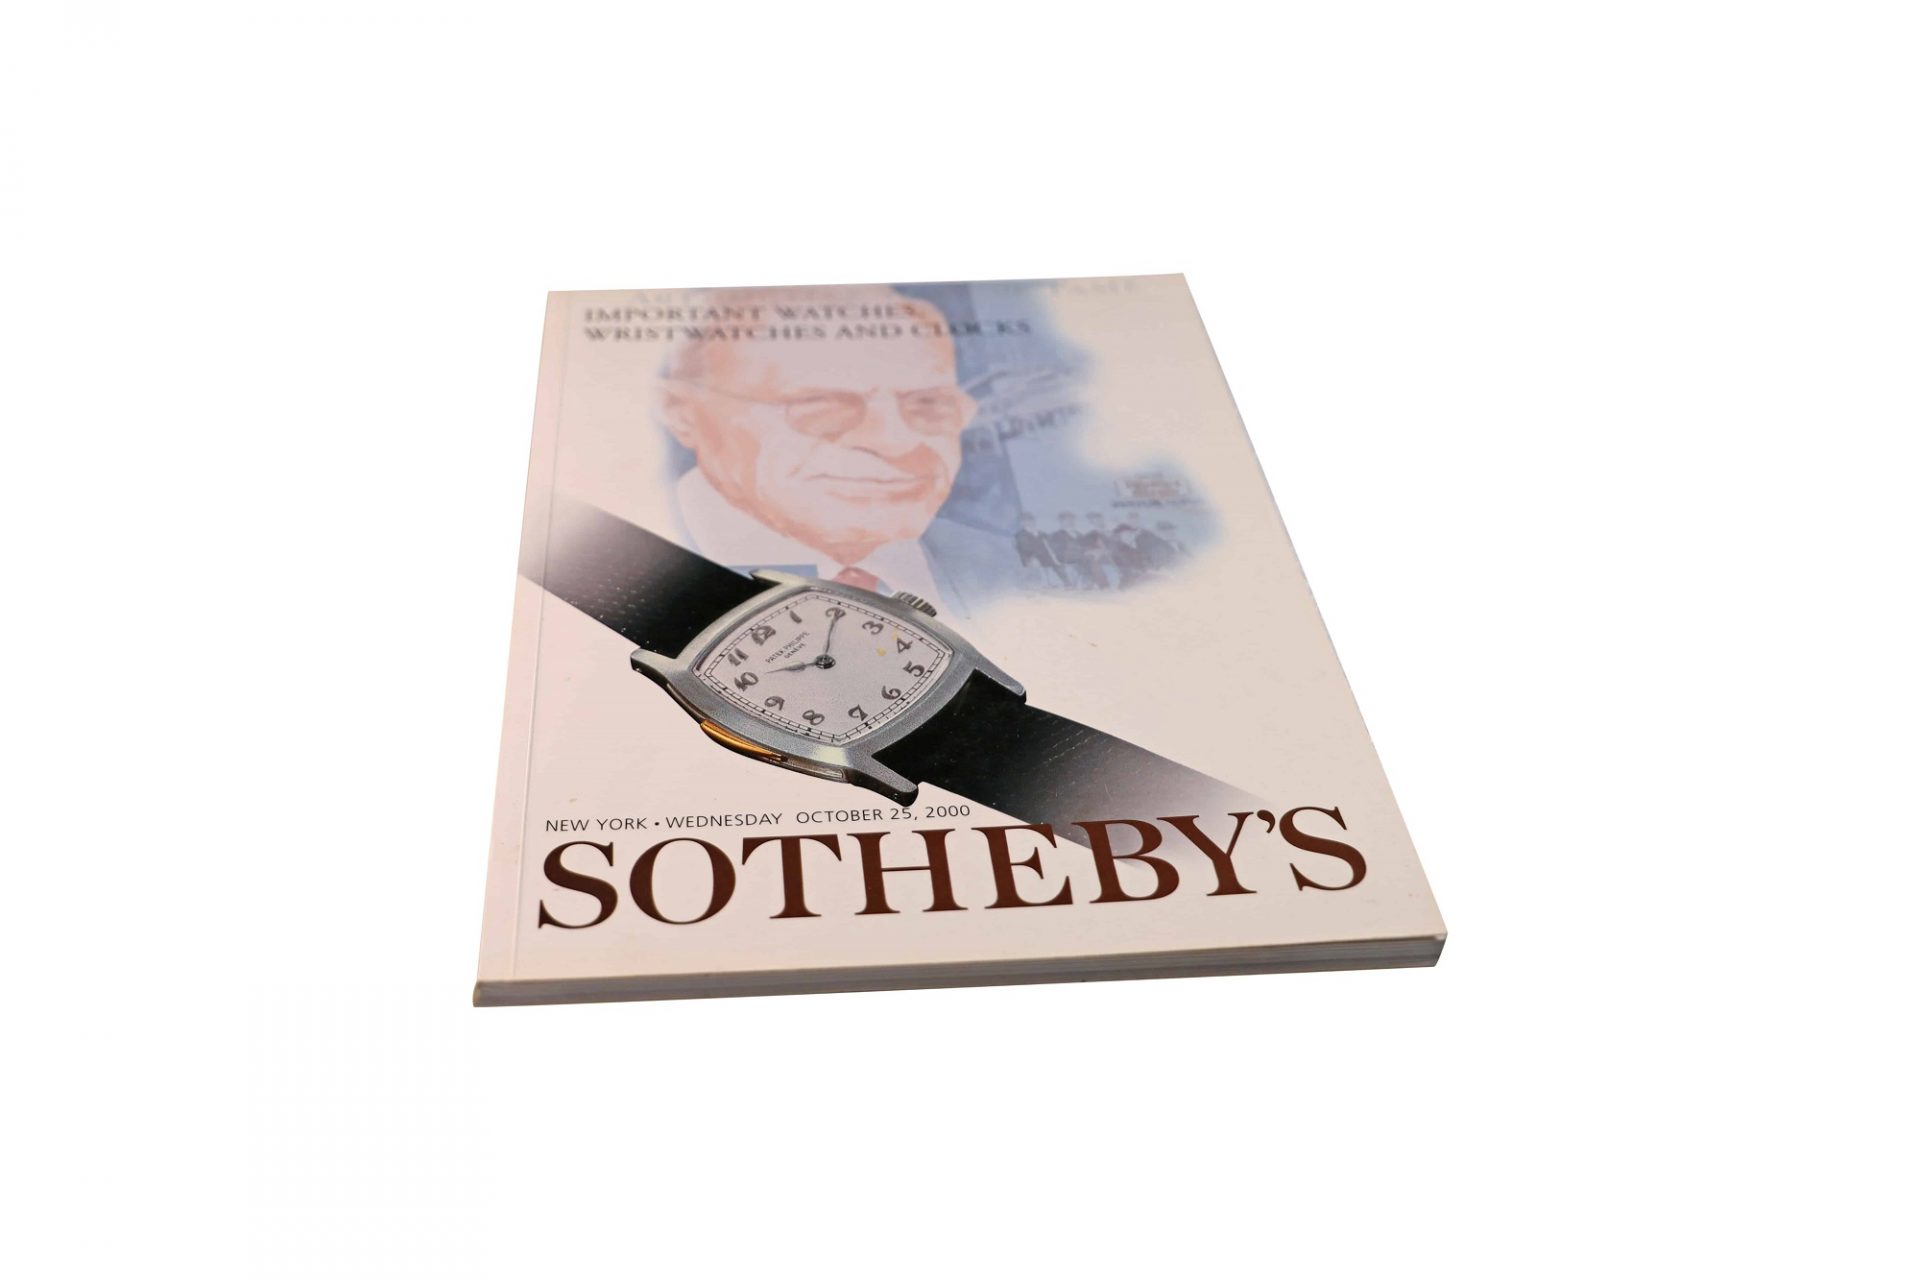 Sotheby's Important Watches, Wristwatches And Clock New York October 25, 2000 Auction Catalog - Rare Watch Parts